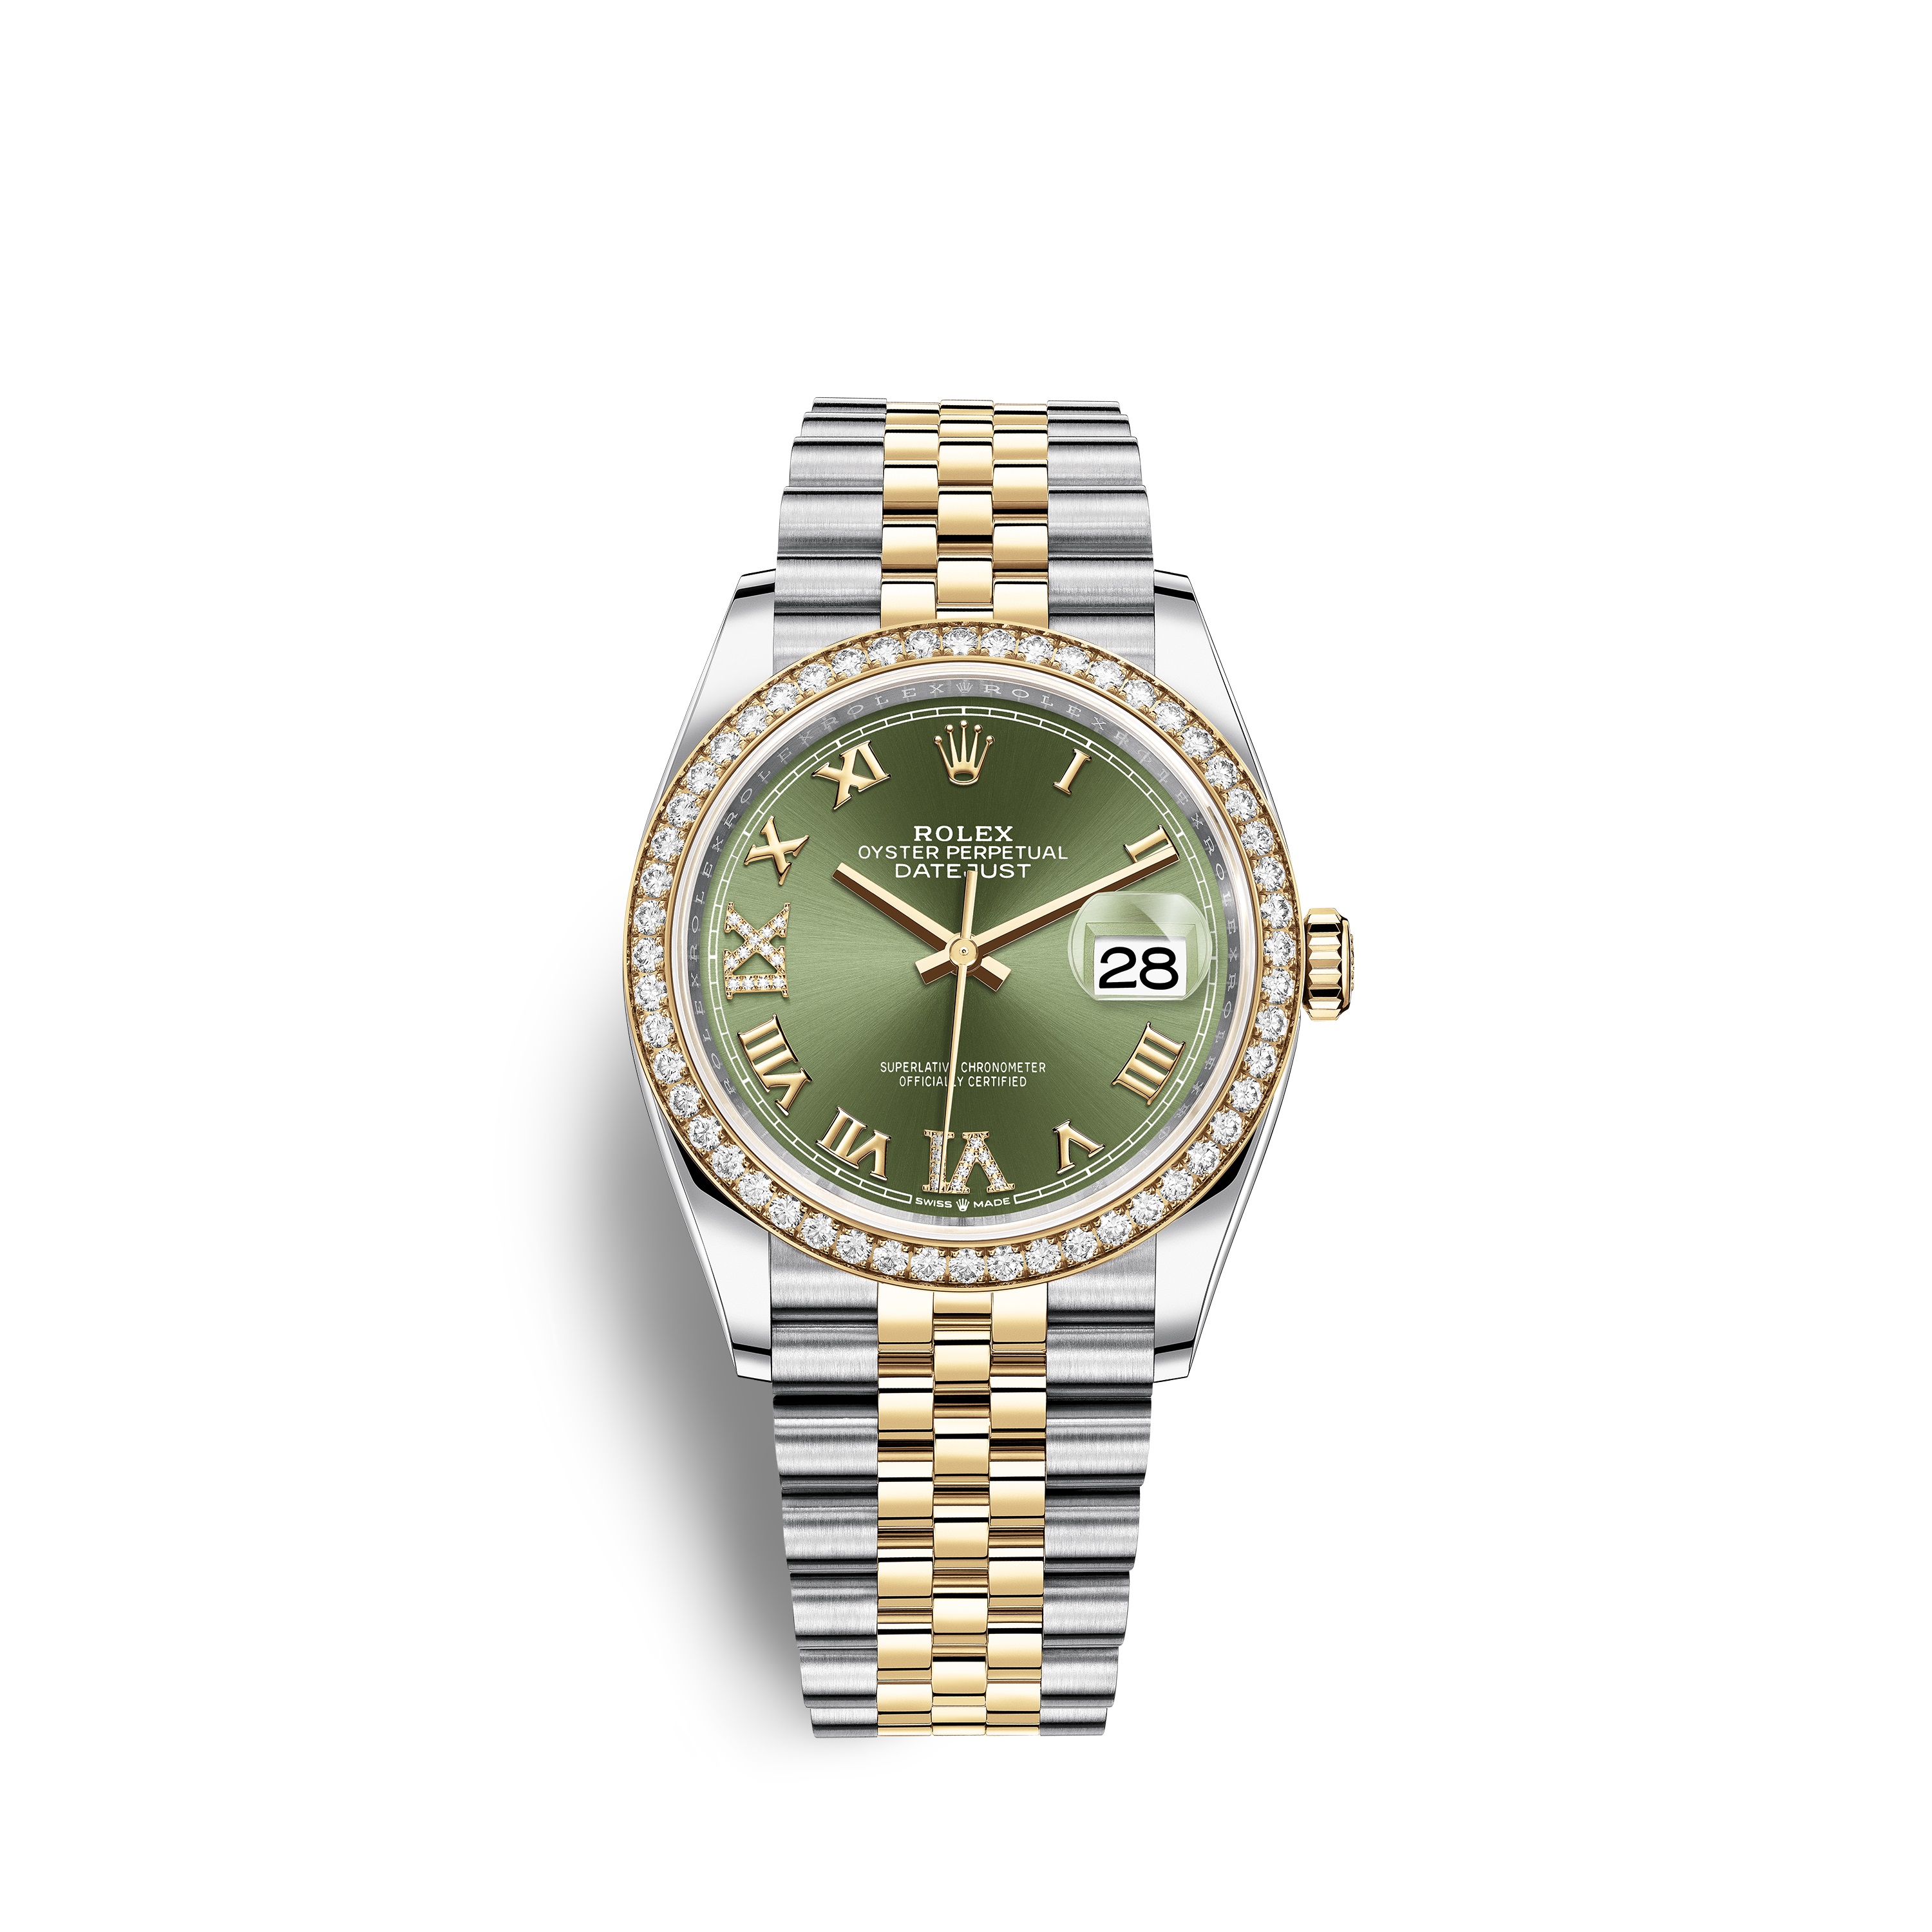 Datejust 36 126283RBR Gold & Stainless Steel Watch (Olive Green Set with Diamonds)